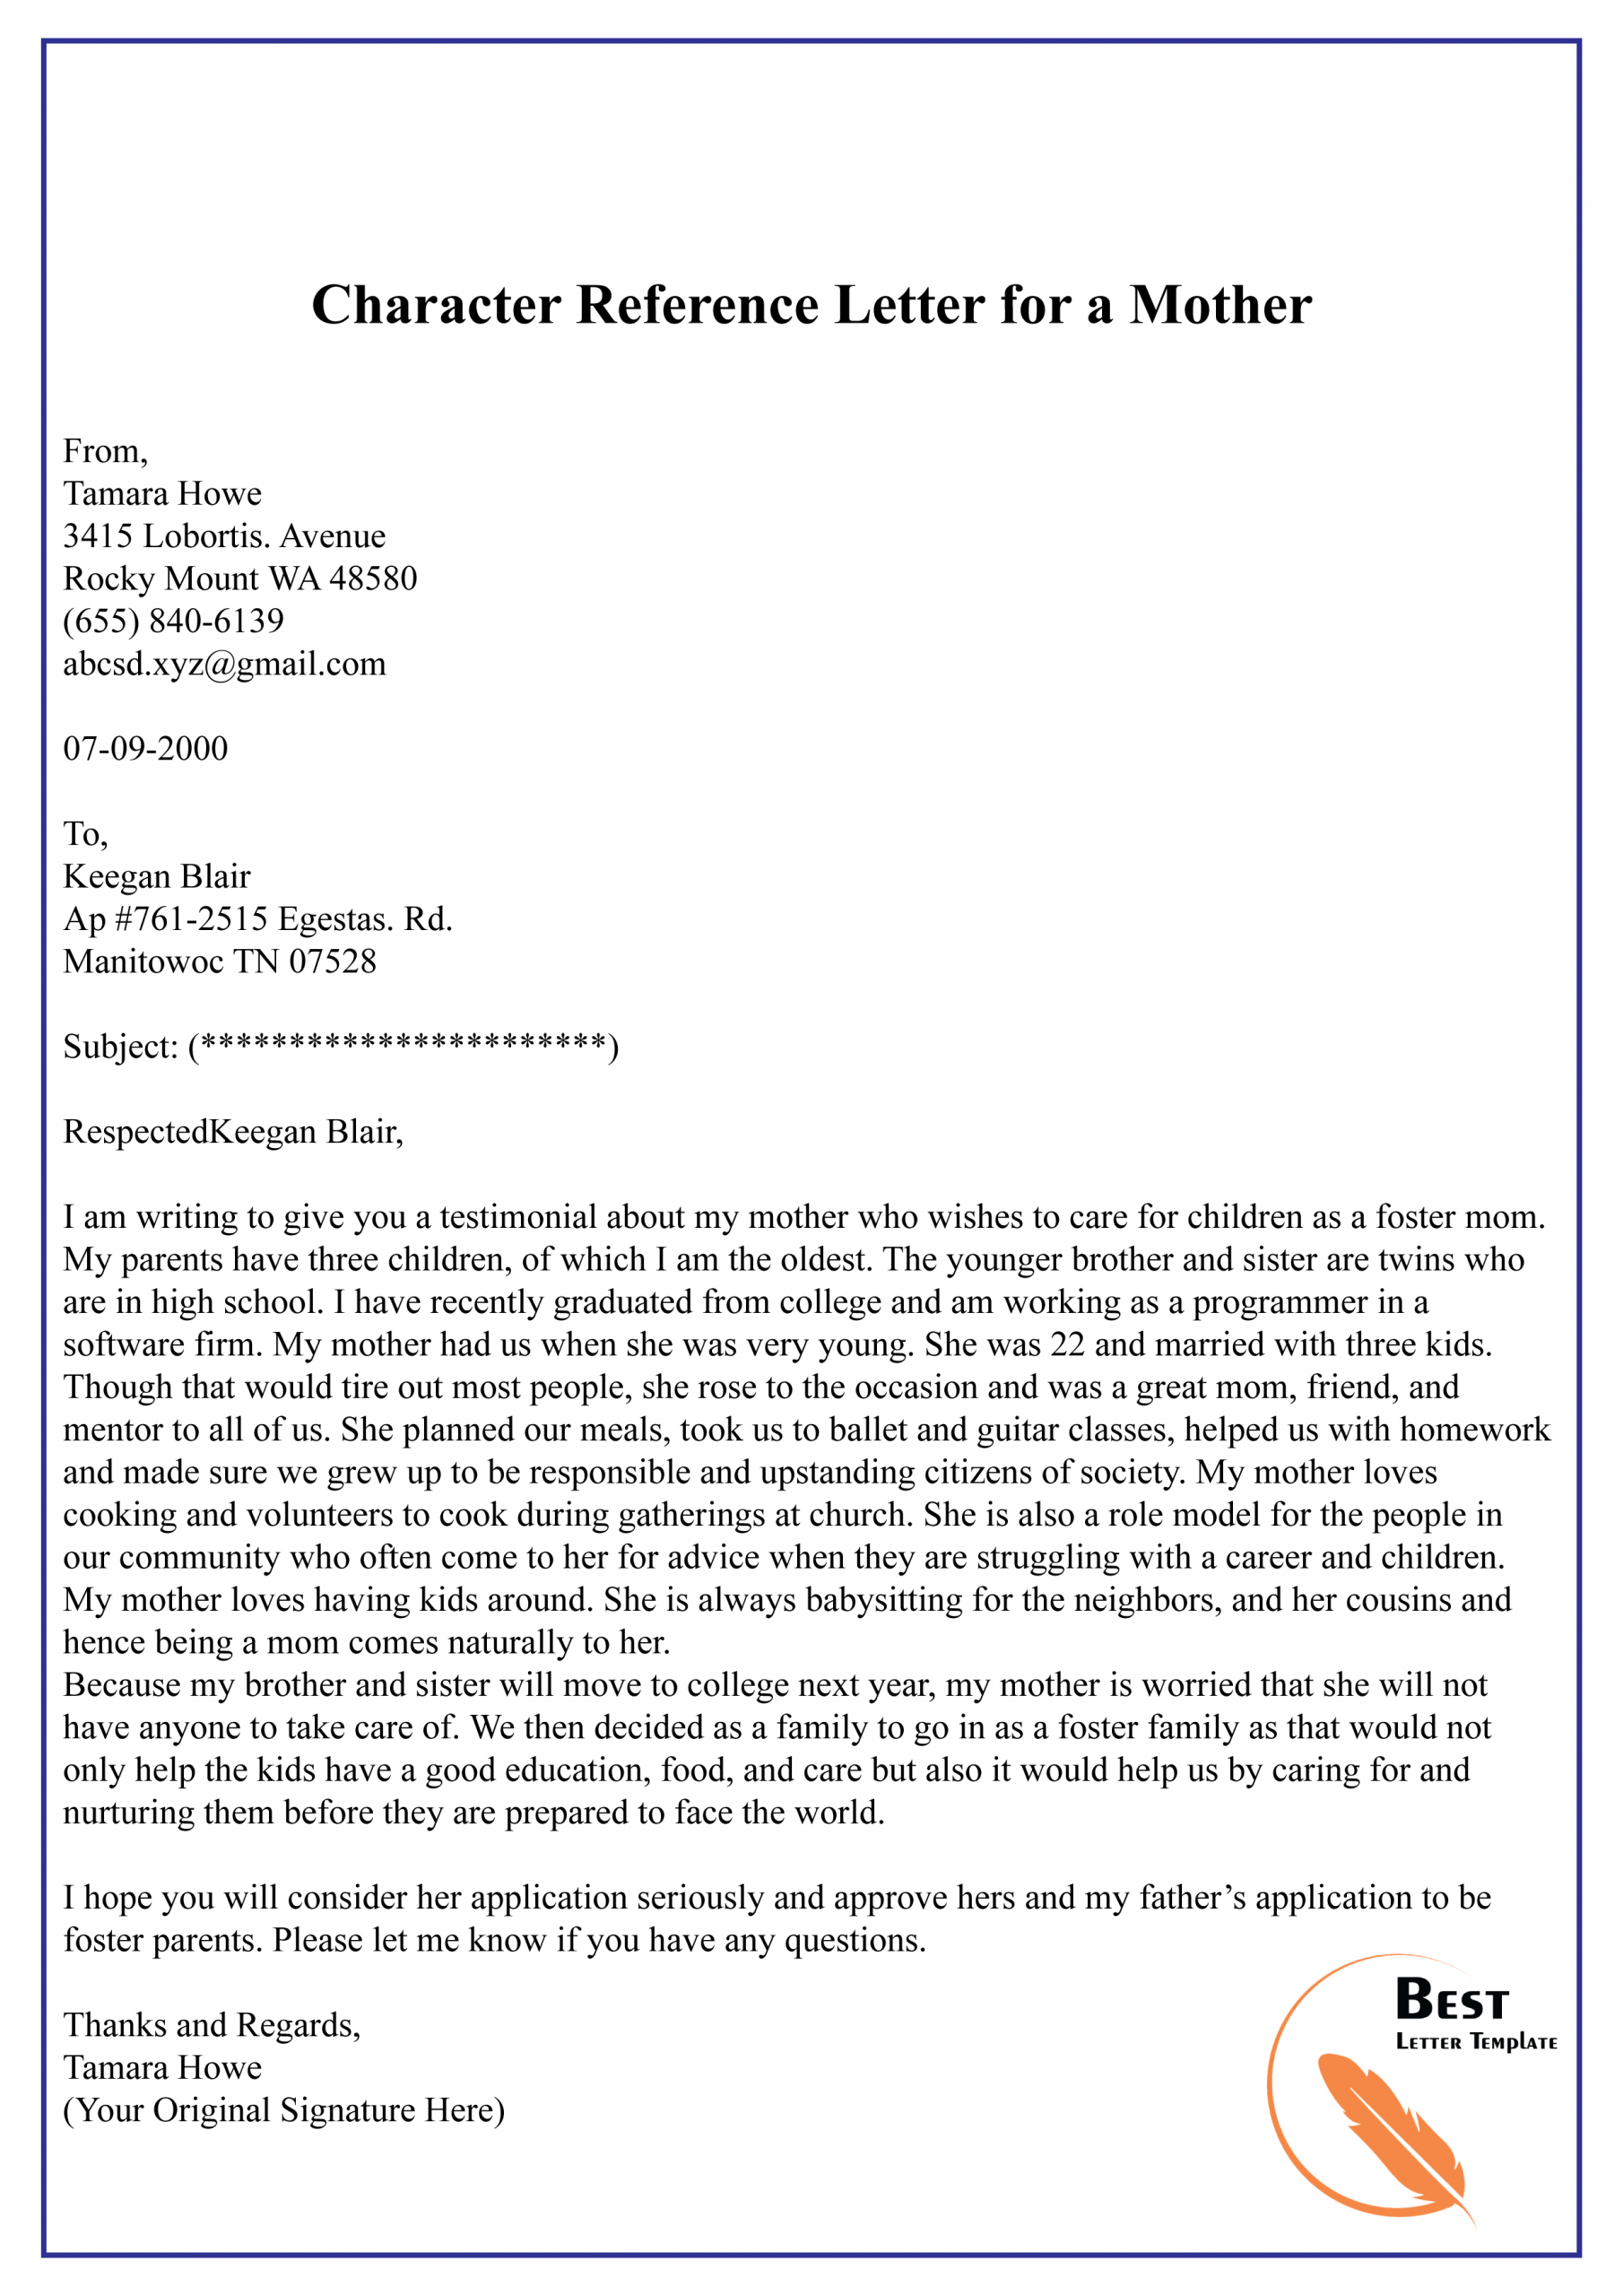 Character Reference Letter For A Mother 01 Best Letter inside sizing 2480 X 3508